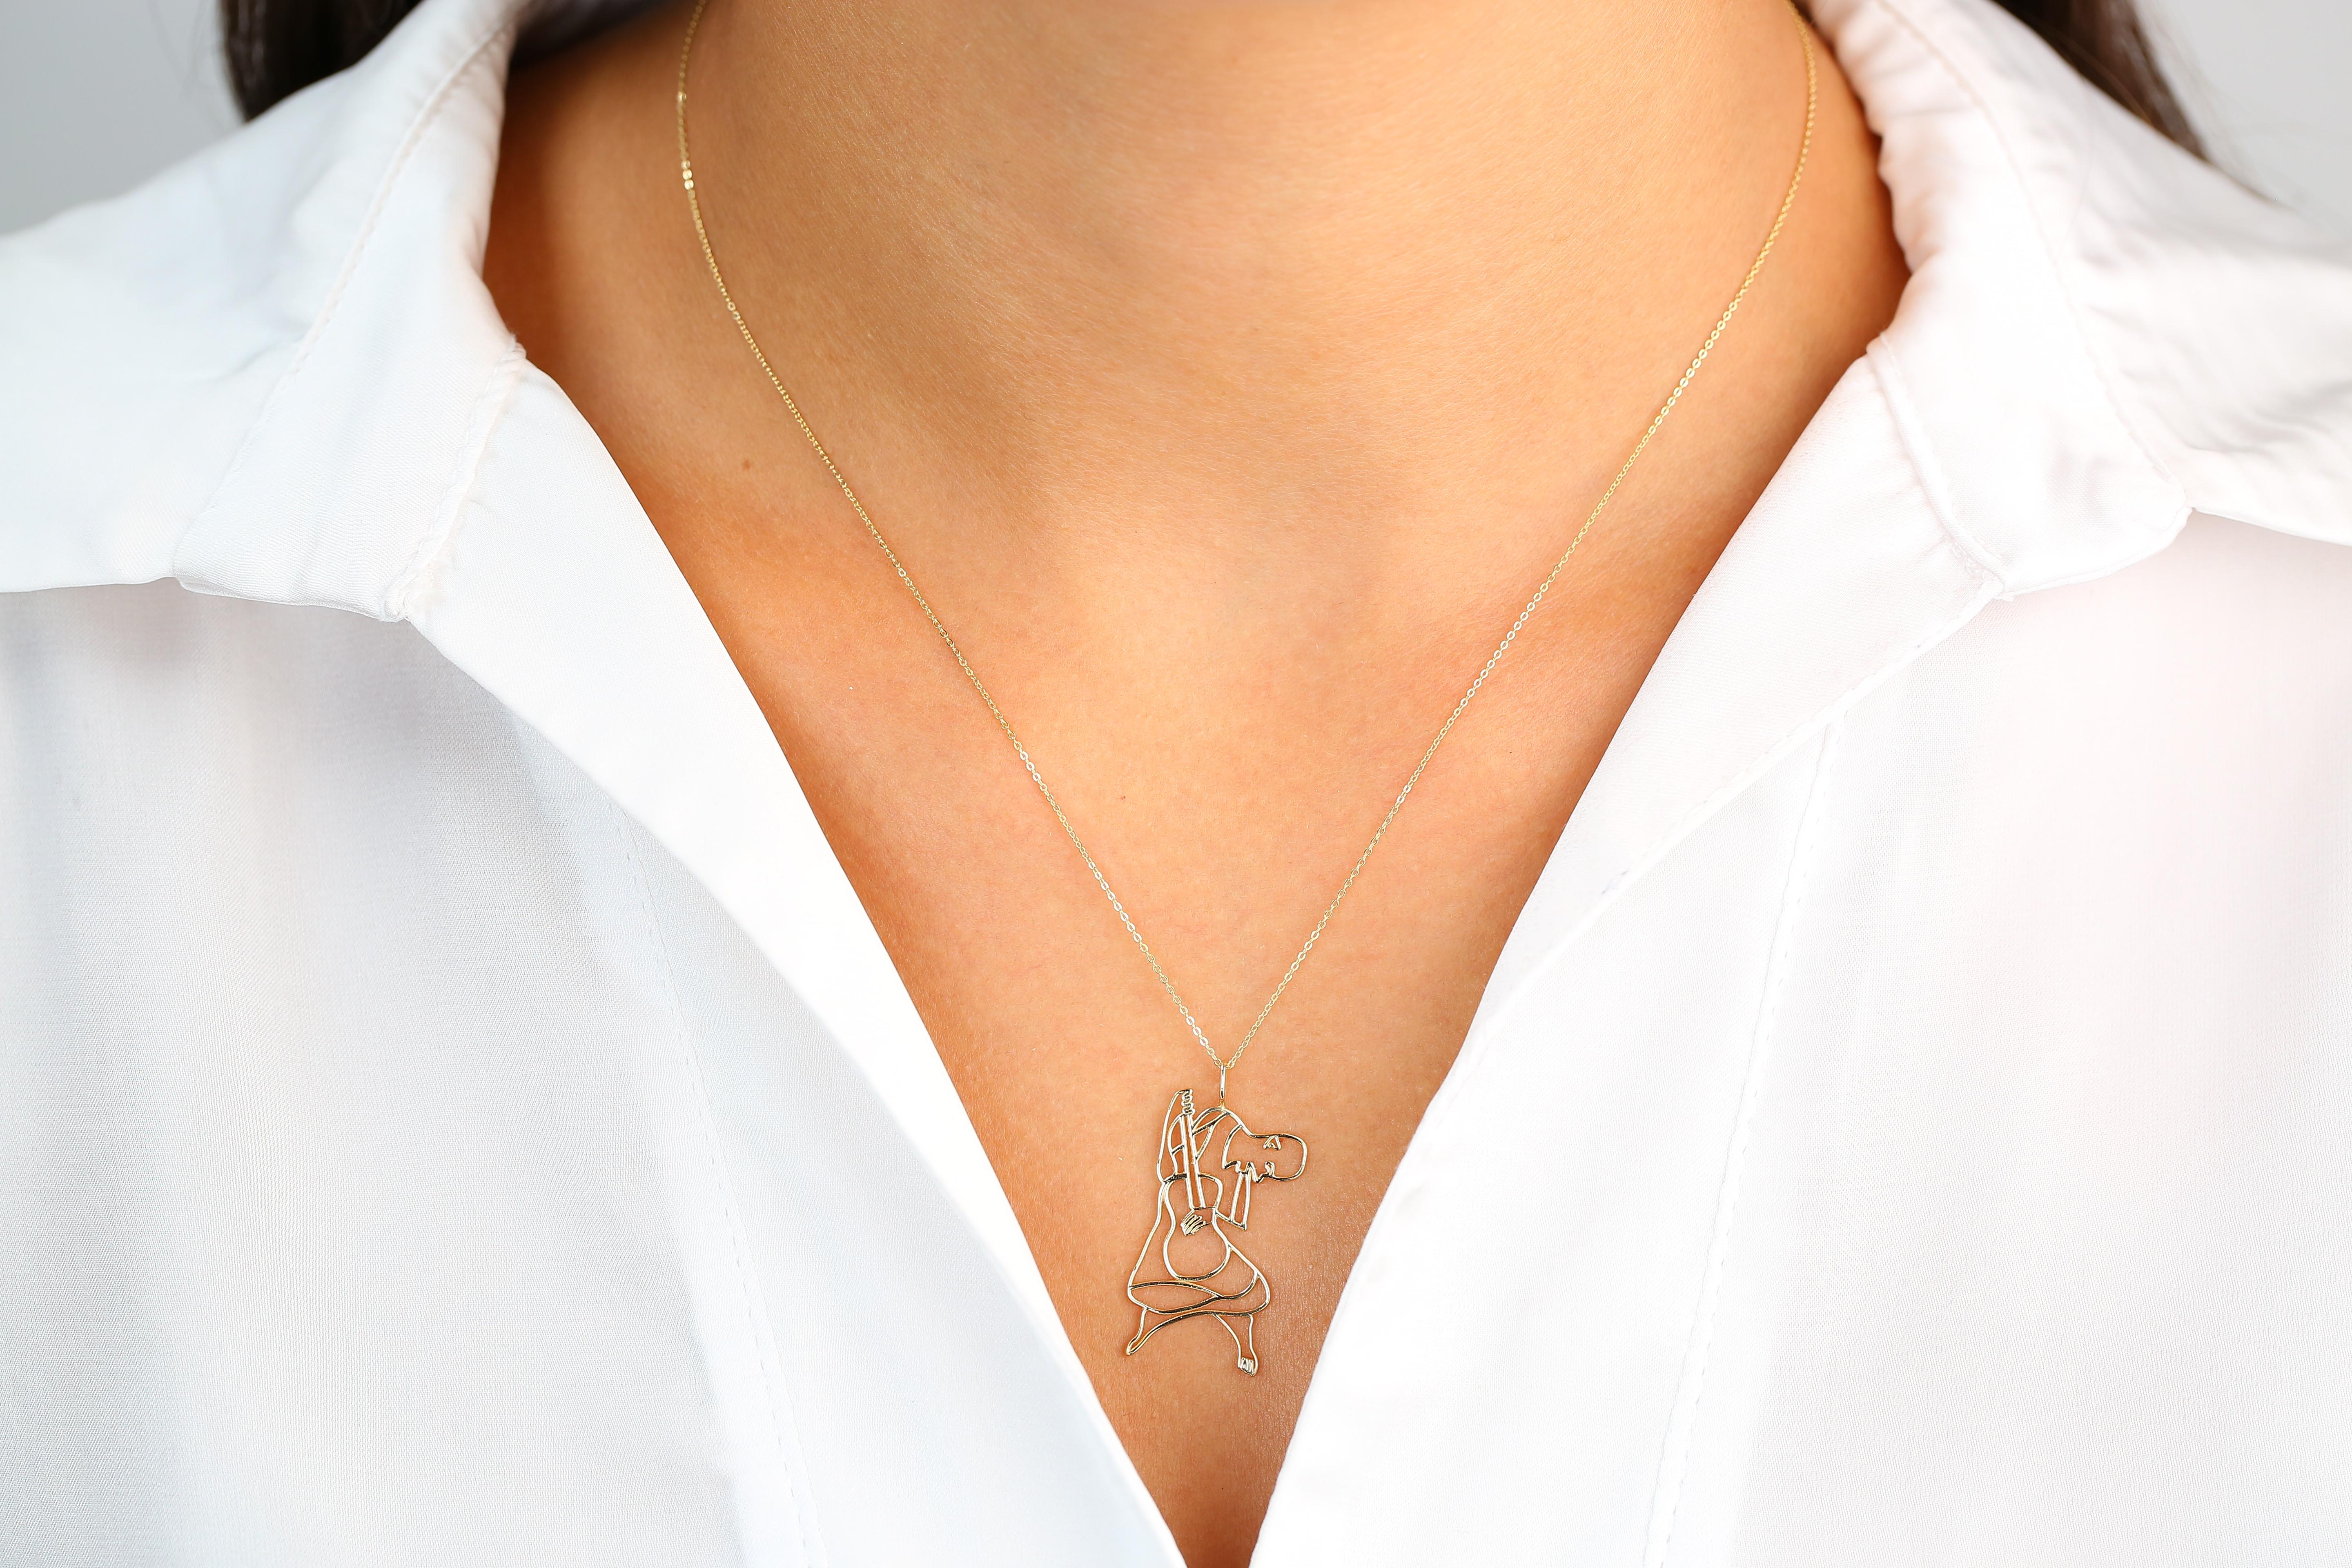 Modern 14K Gold Cubic Guitarist Necklace, Inspired by Picasso's 